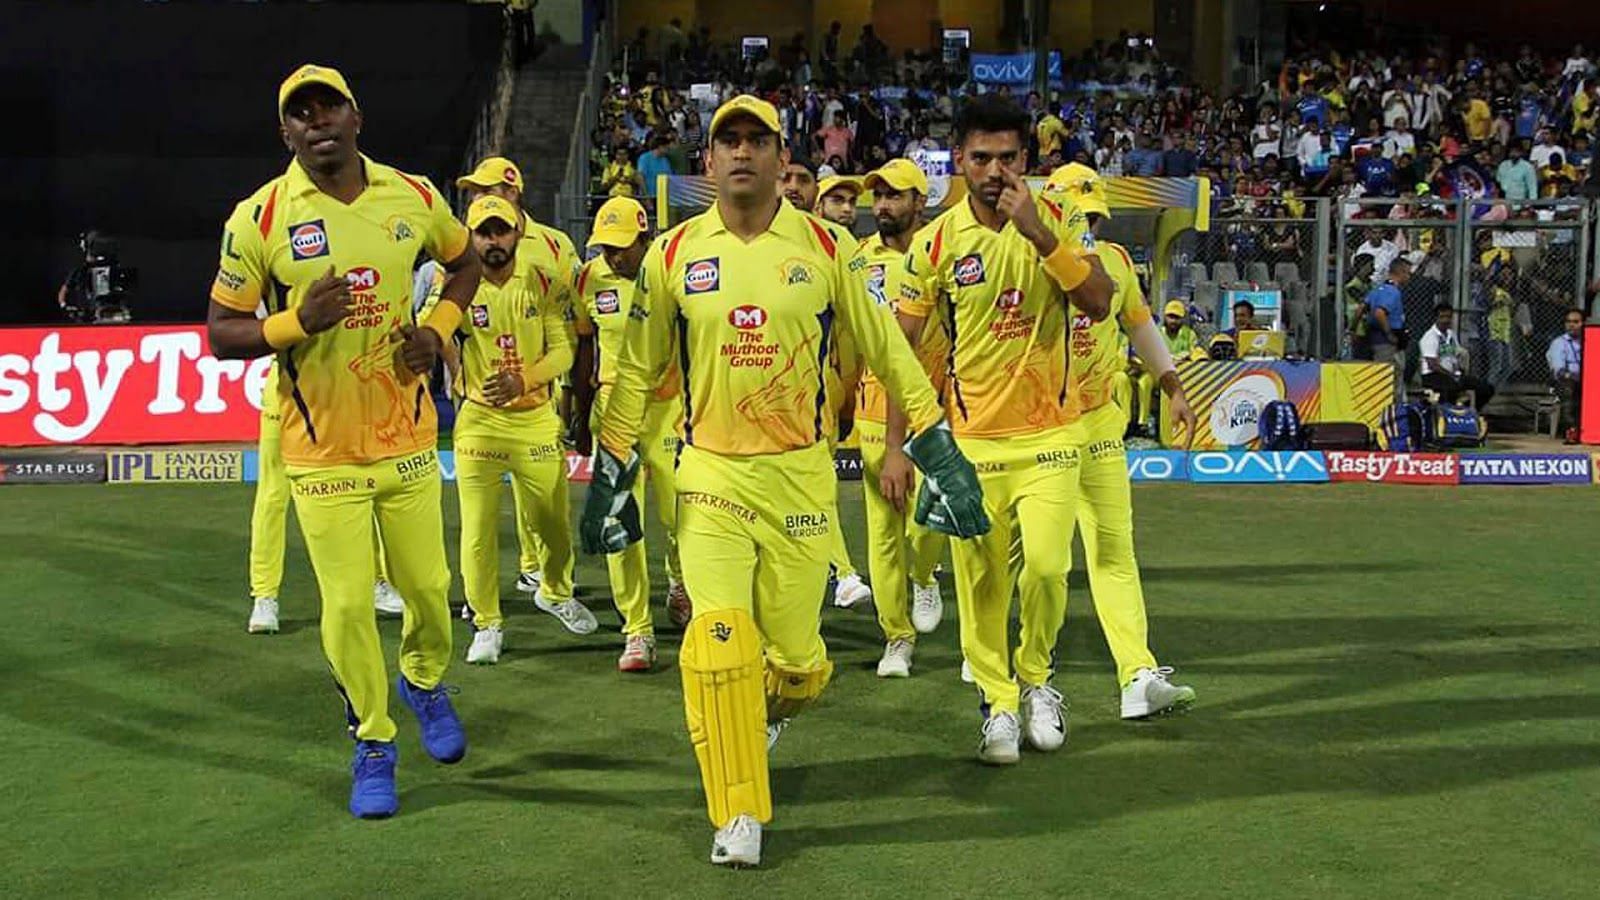 The CSK jersey features ten brands - six on the shirt, two on the pants and two on the cap.